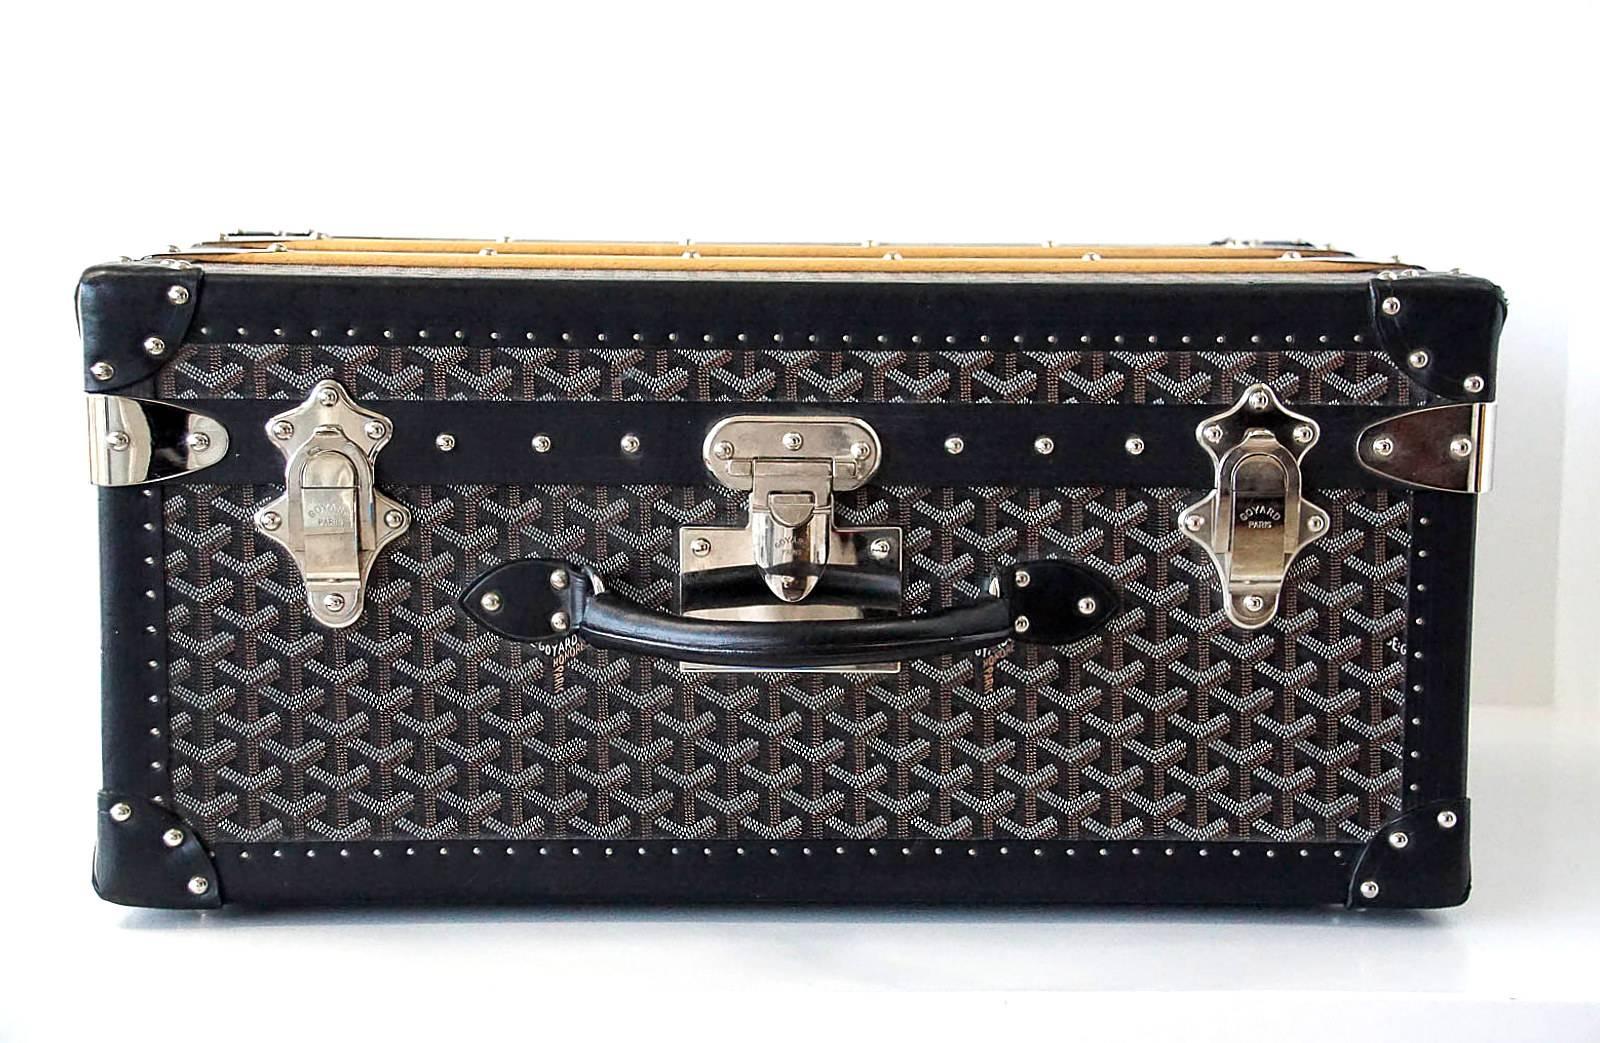 Guaranteed authentic Goyard black and brown signature monogram Model Palace 55 trunk.
Palladium fittings and logo embossed closures.
Trunk interior is lined in signature yellow canvas.
Removable insert with embossed straps and fittings.
A fabulous